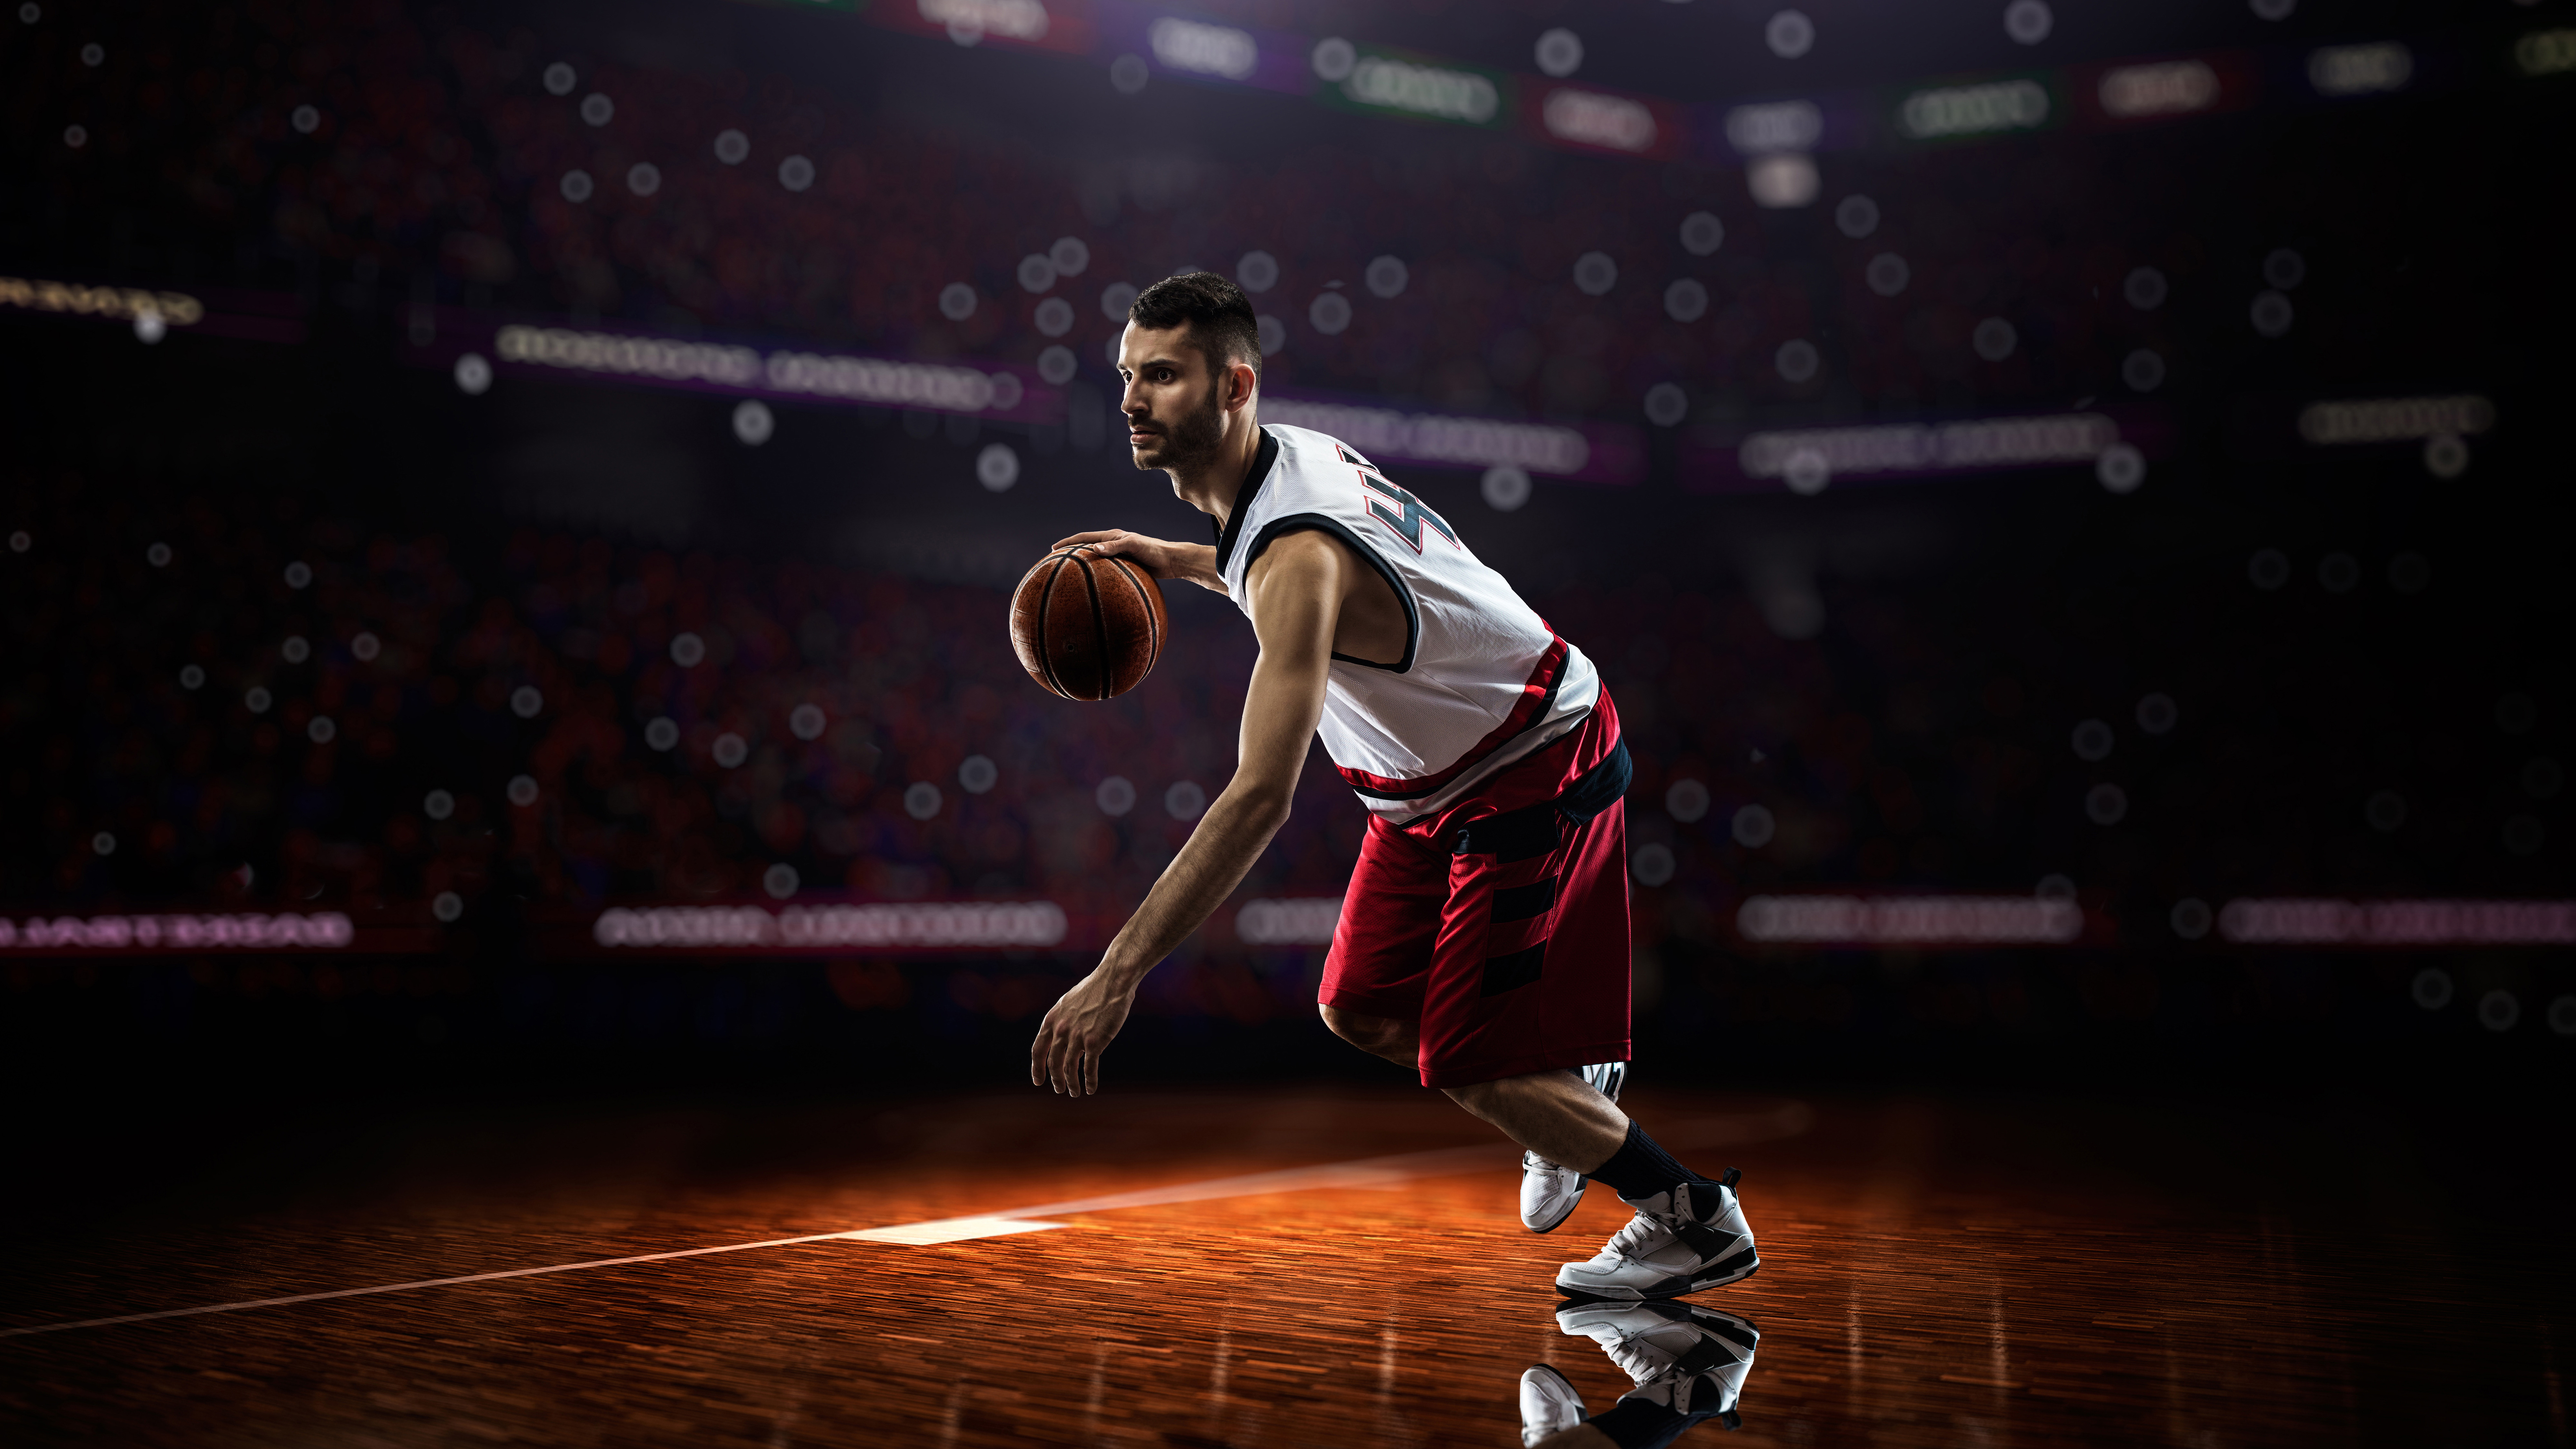 7680x4320 Basketball Player 8k 8k HD 4k Wallpapers, Images, Backgrounds,  Photos and Pictures